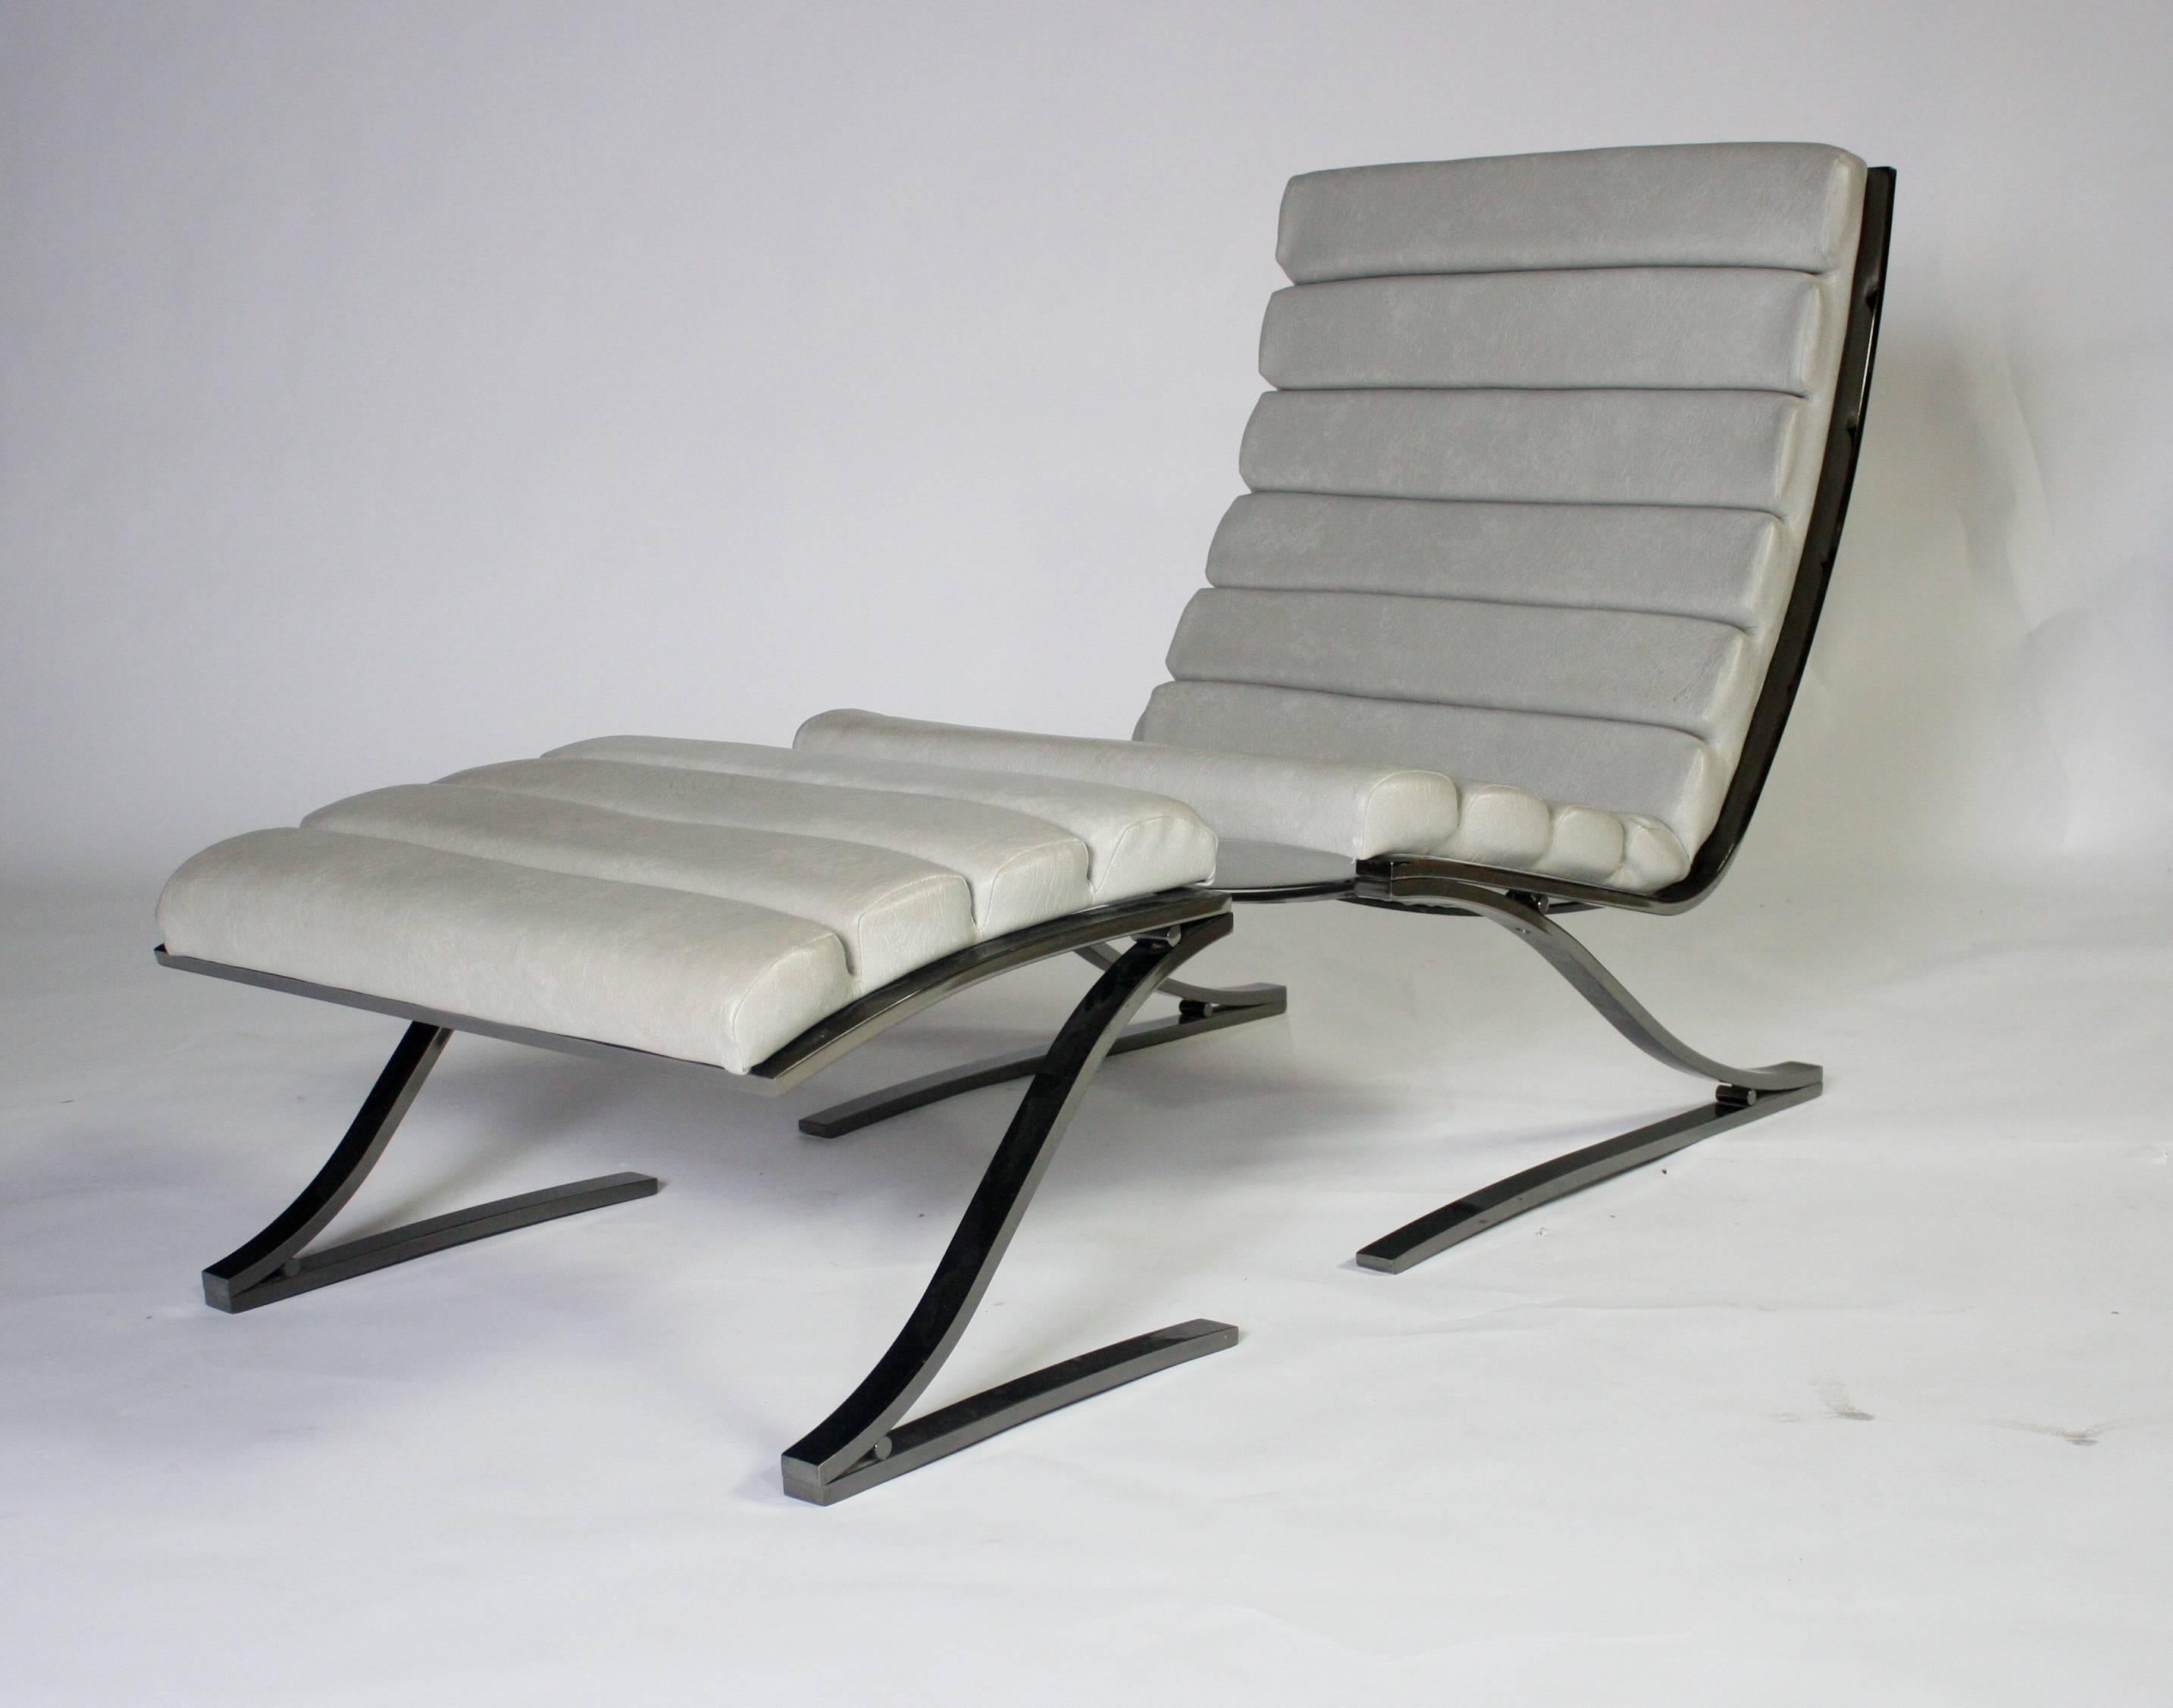 Late 20th Century Design Institute of America Cantilevered Lounge Chair and Ottoman